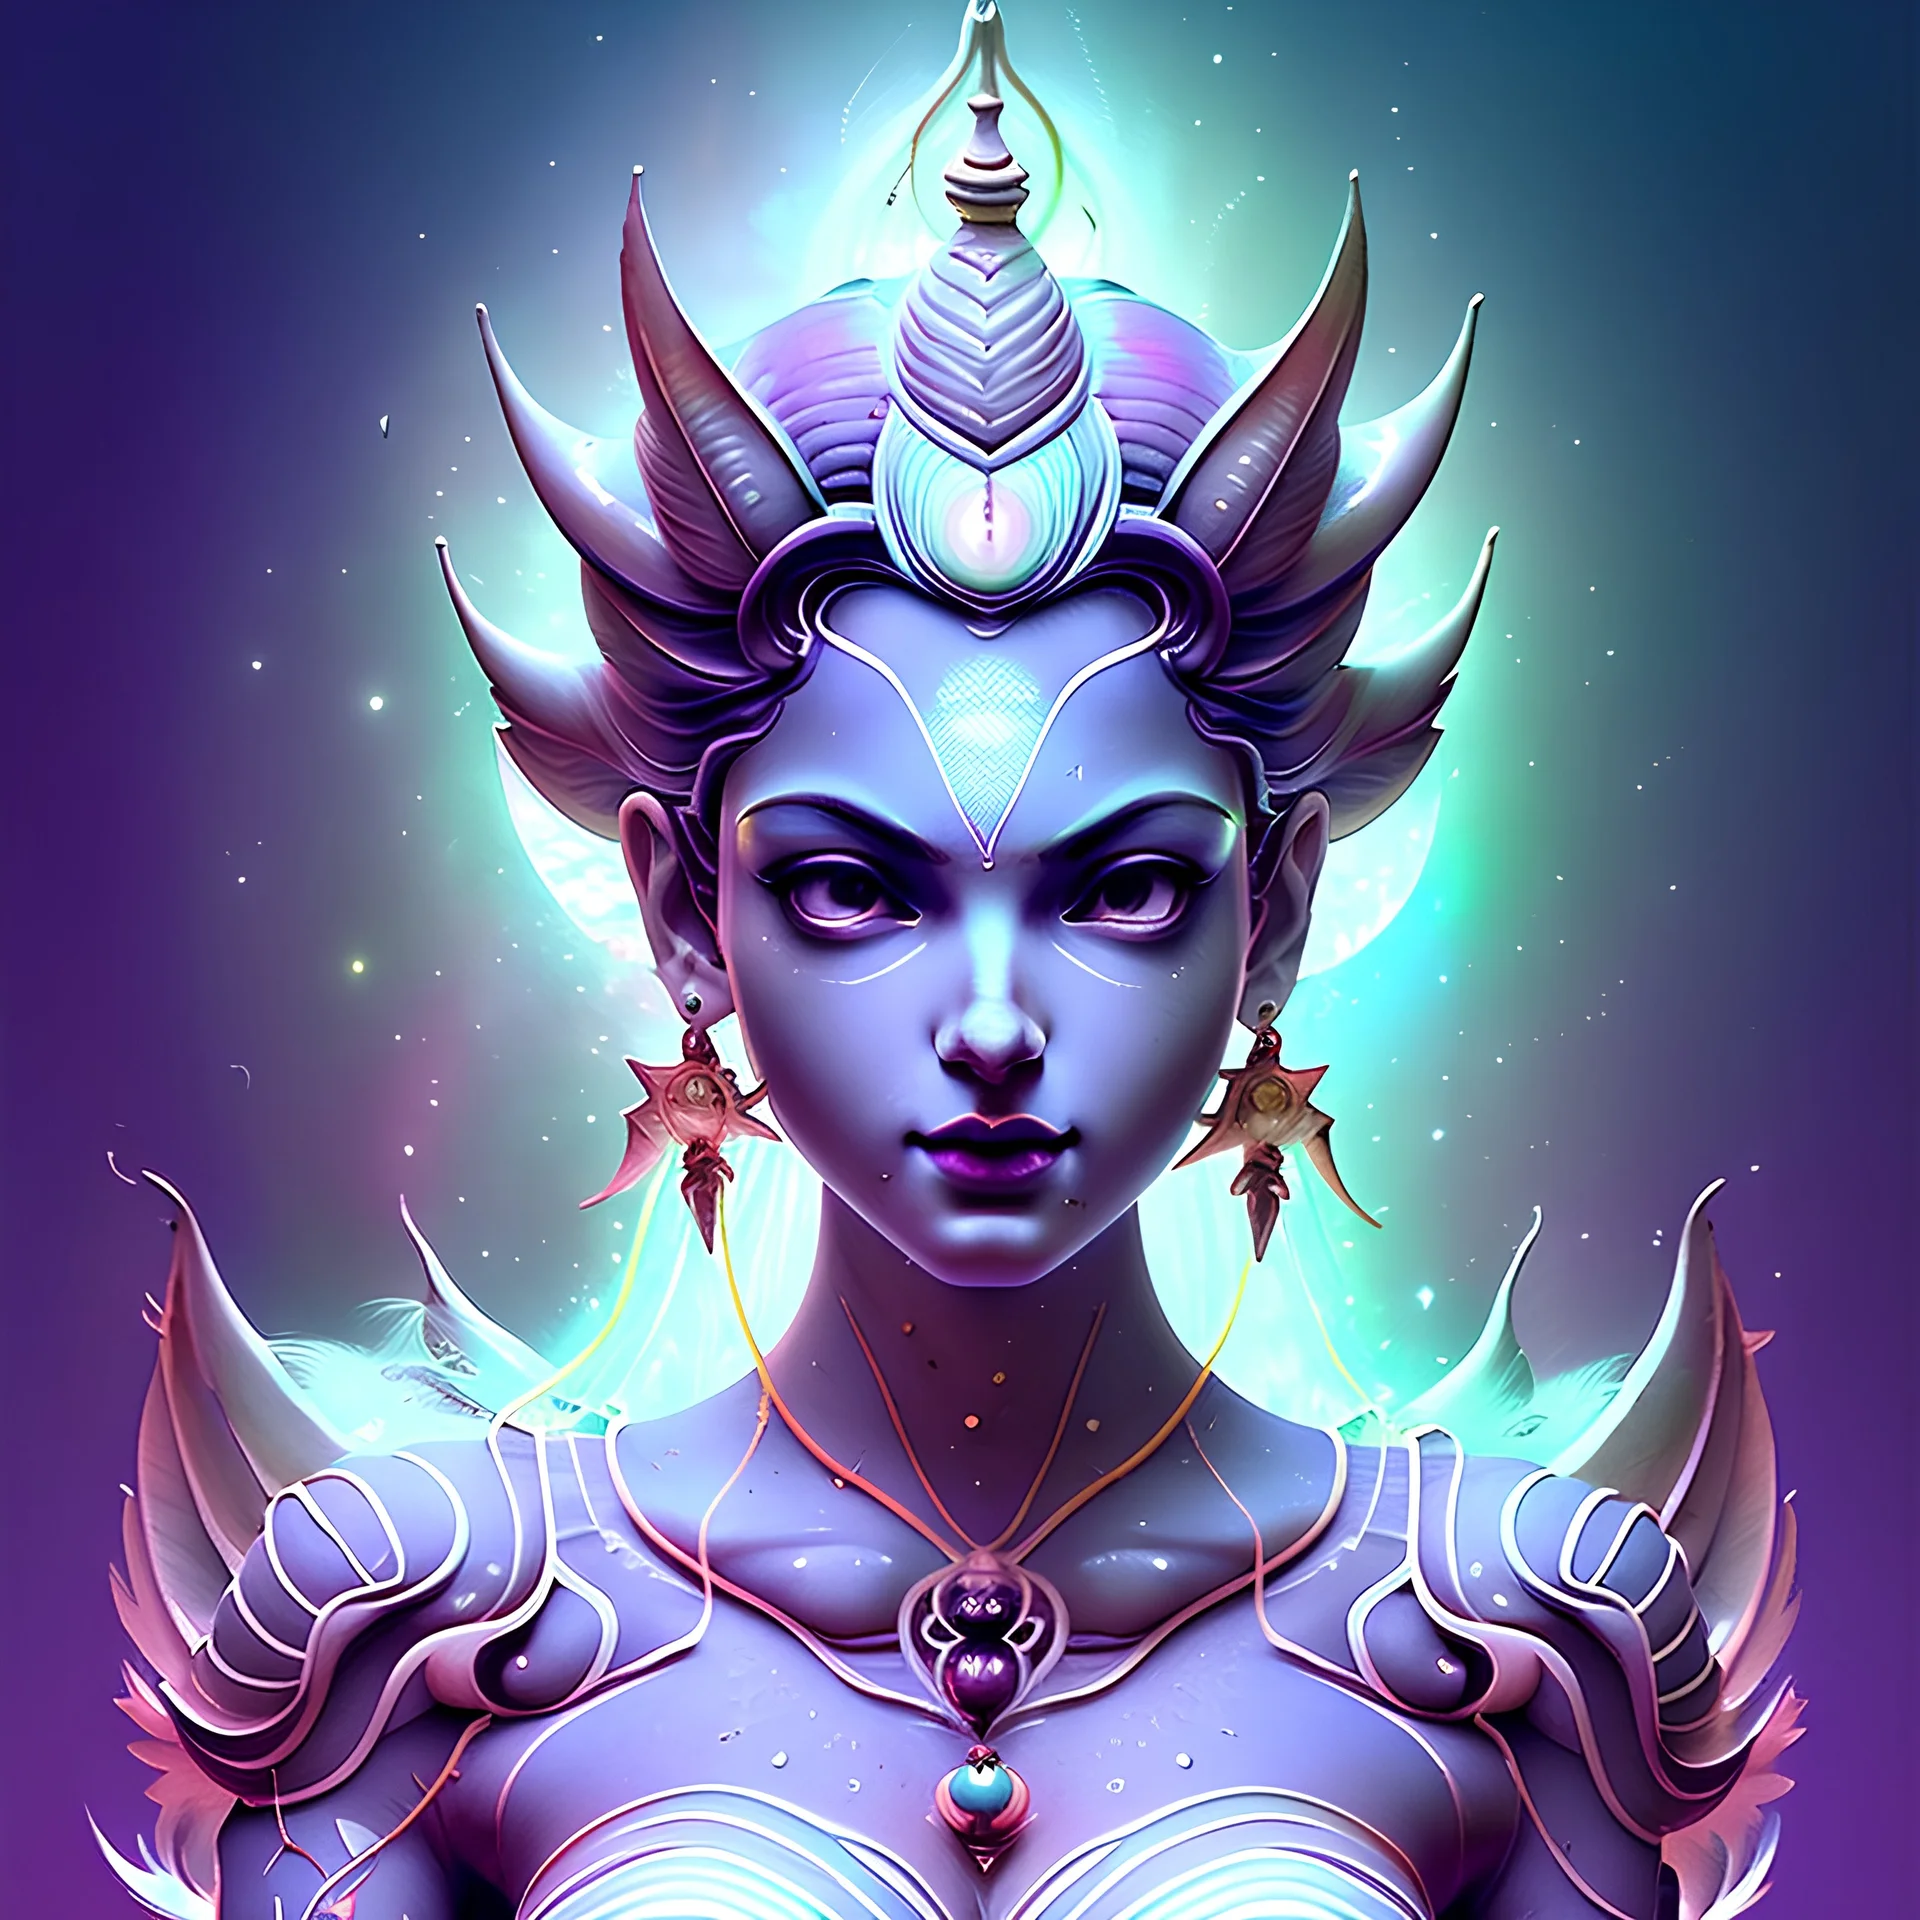 Ultraquality digital_illustration of a goddess laxmi !!!, deep watercolor!, stippling!, speed_paint!, thick_brush_strokes!, anime, cosmic, astral, inspired by ismail inceoglu, Dan_witz, moebius , android_jones, artgerm , studio mappa, photorealistic, Hyperrealistic, cgsociety zbrush_central fantasy album cover art 4k hdr 64 megapixels 8k back lit complex elaborate fantastical hyperdetailed